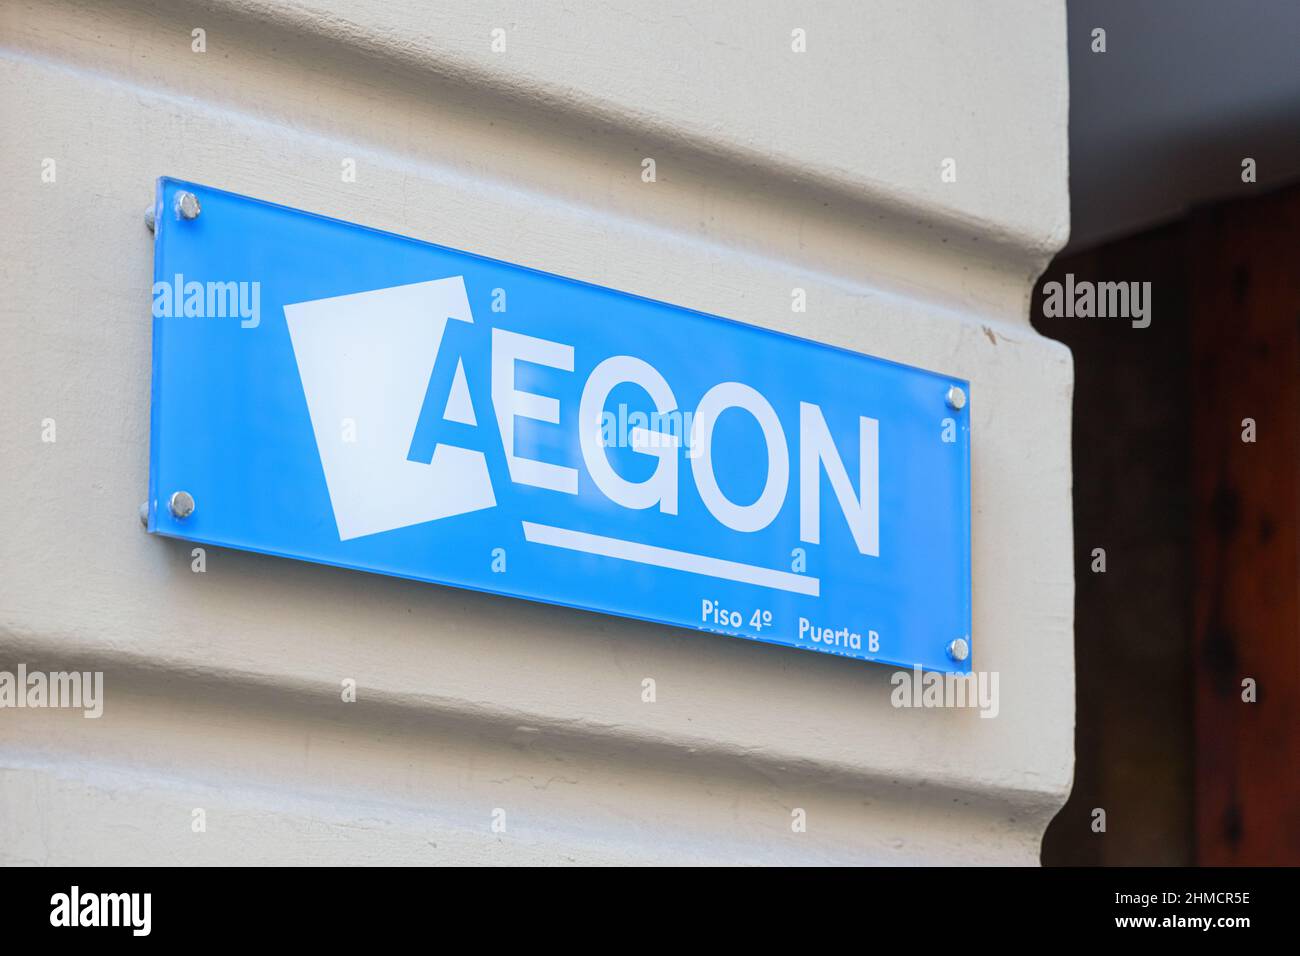 VALENCIA, SPAIN - FEBRUARY 02, 2022: Aegon is a Dutch multinational life insurance, pensions and asset management company Stock Photo